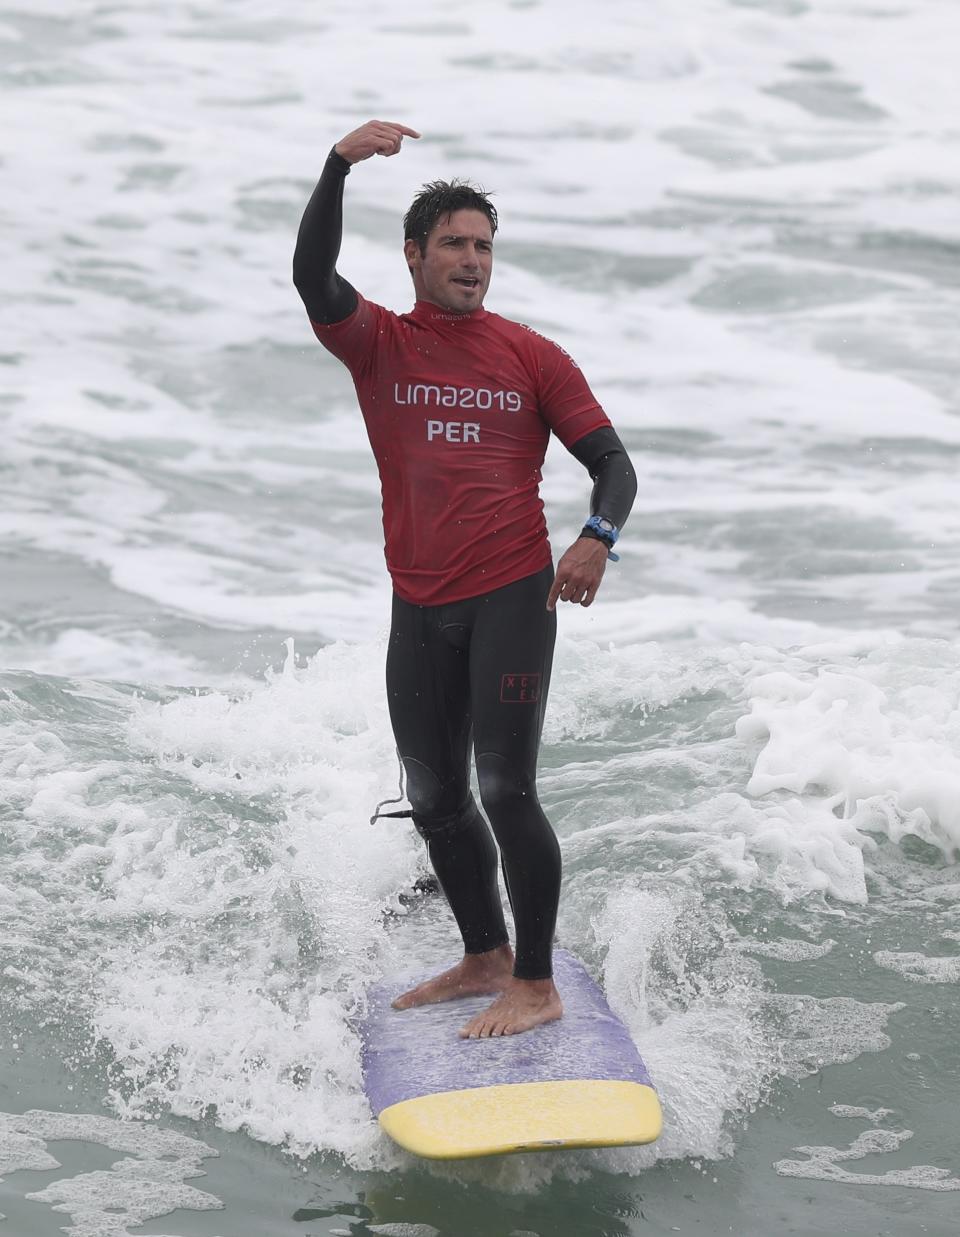 Benoit Clemente of Peru celebrates after winning the gold for longboard during men's SUP surfing a thte Pan American Games on Punta Rocas beach in Lima Peru, Sunday, Aug. 4, 2019. (AP Photo/Martin Mejia)